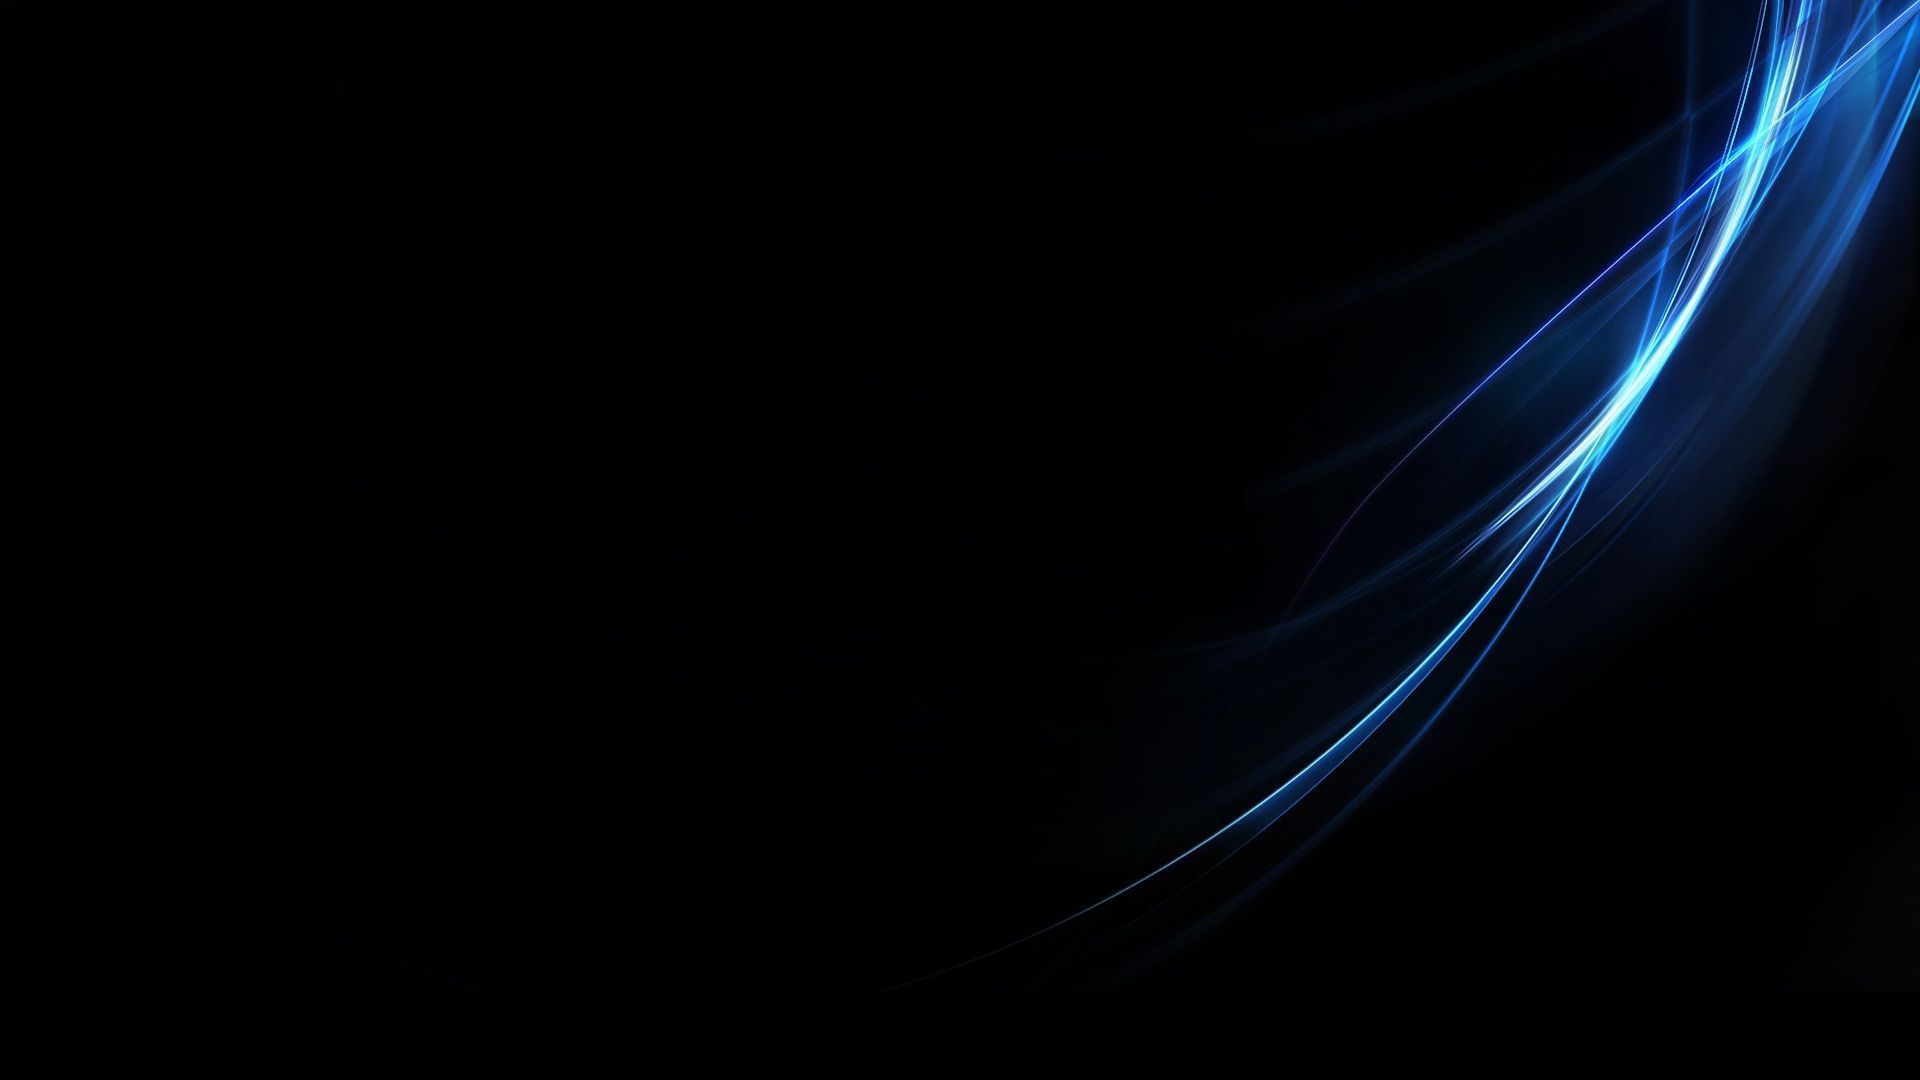 Blue And Black Wallpaper 44 - [1920x1080]